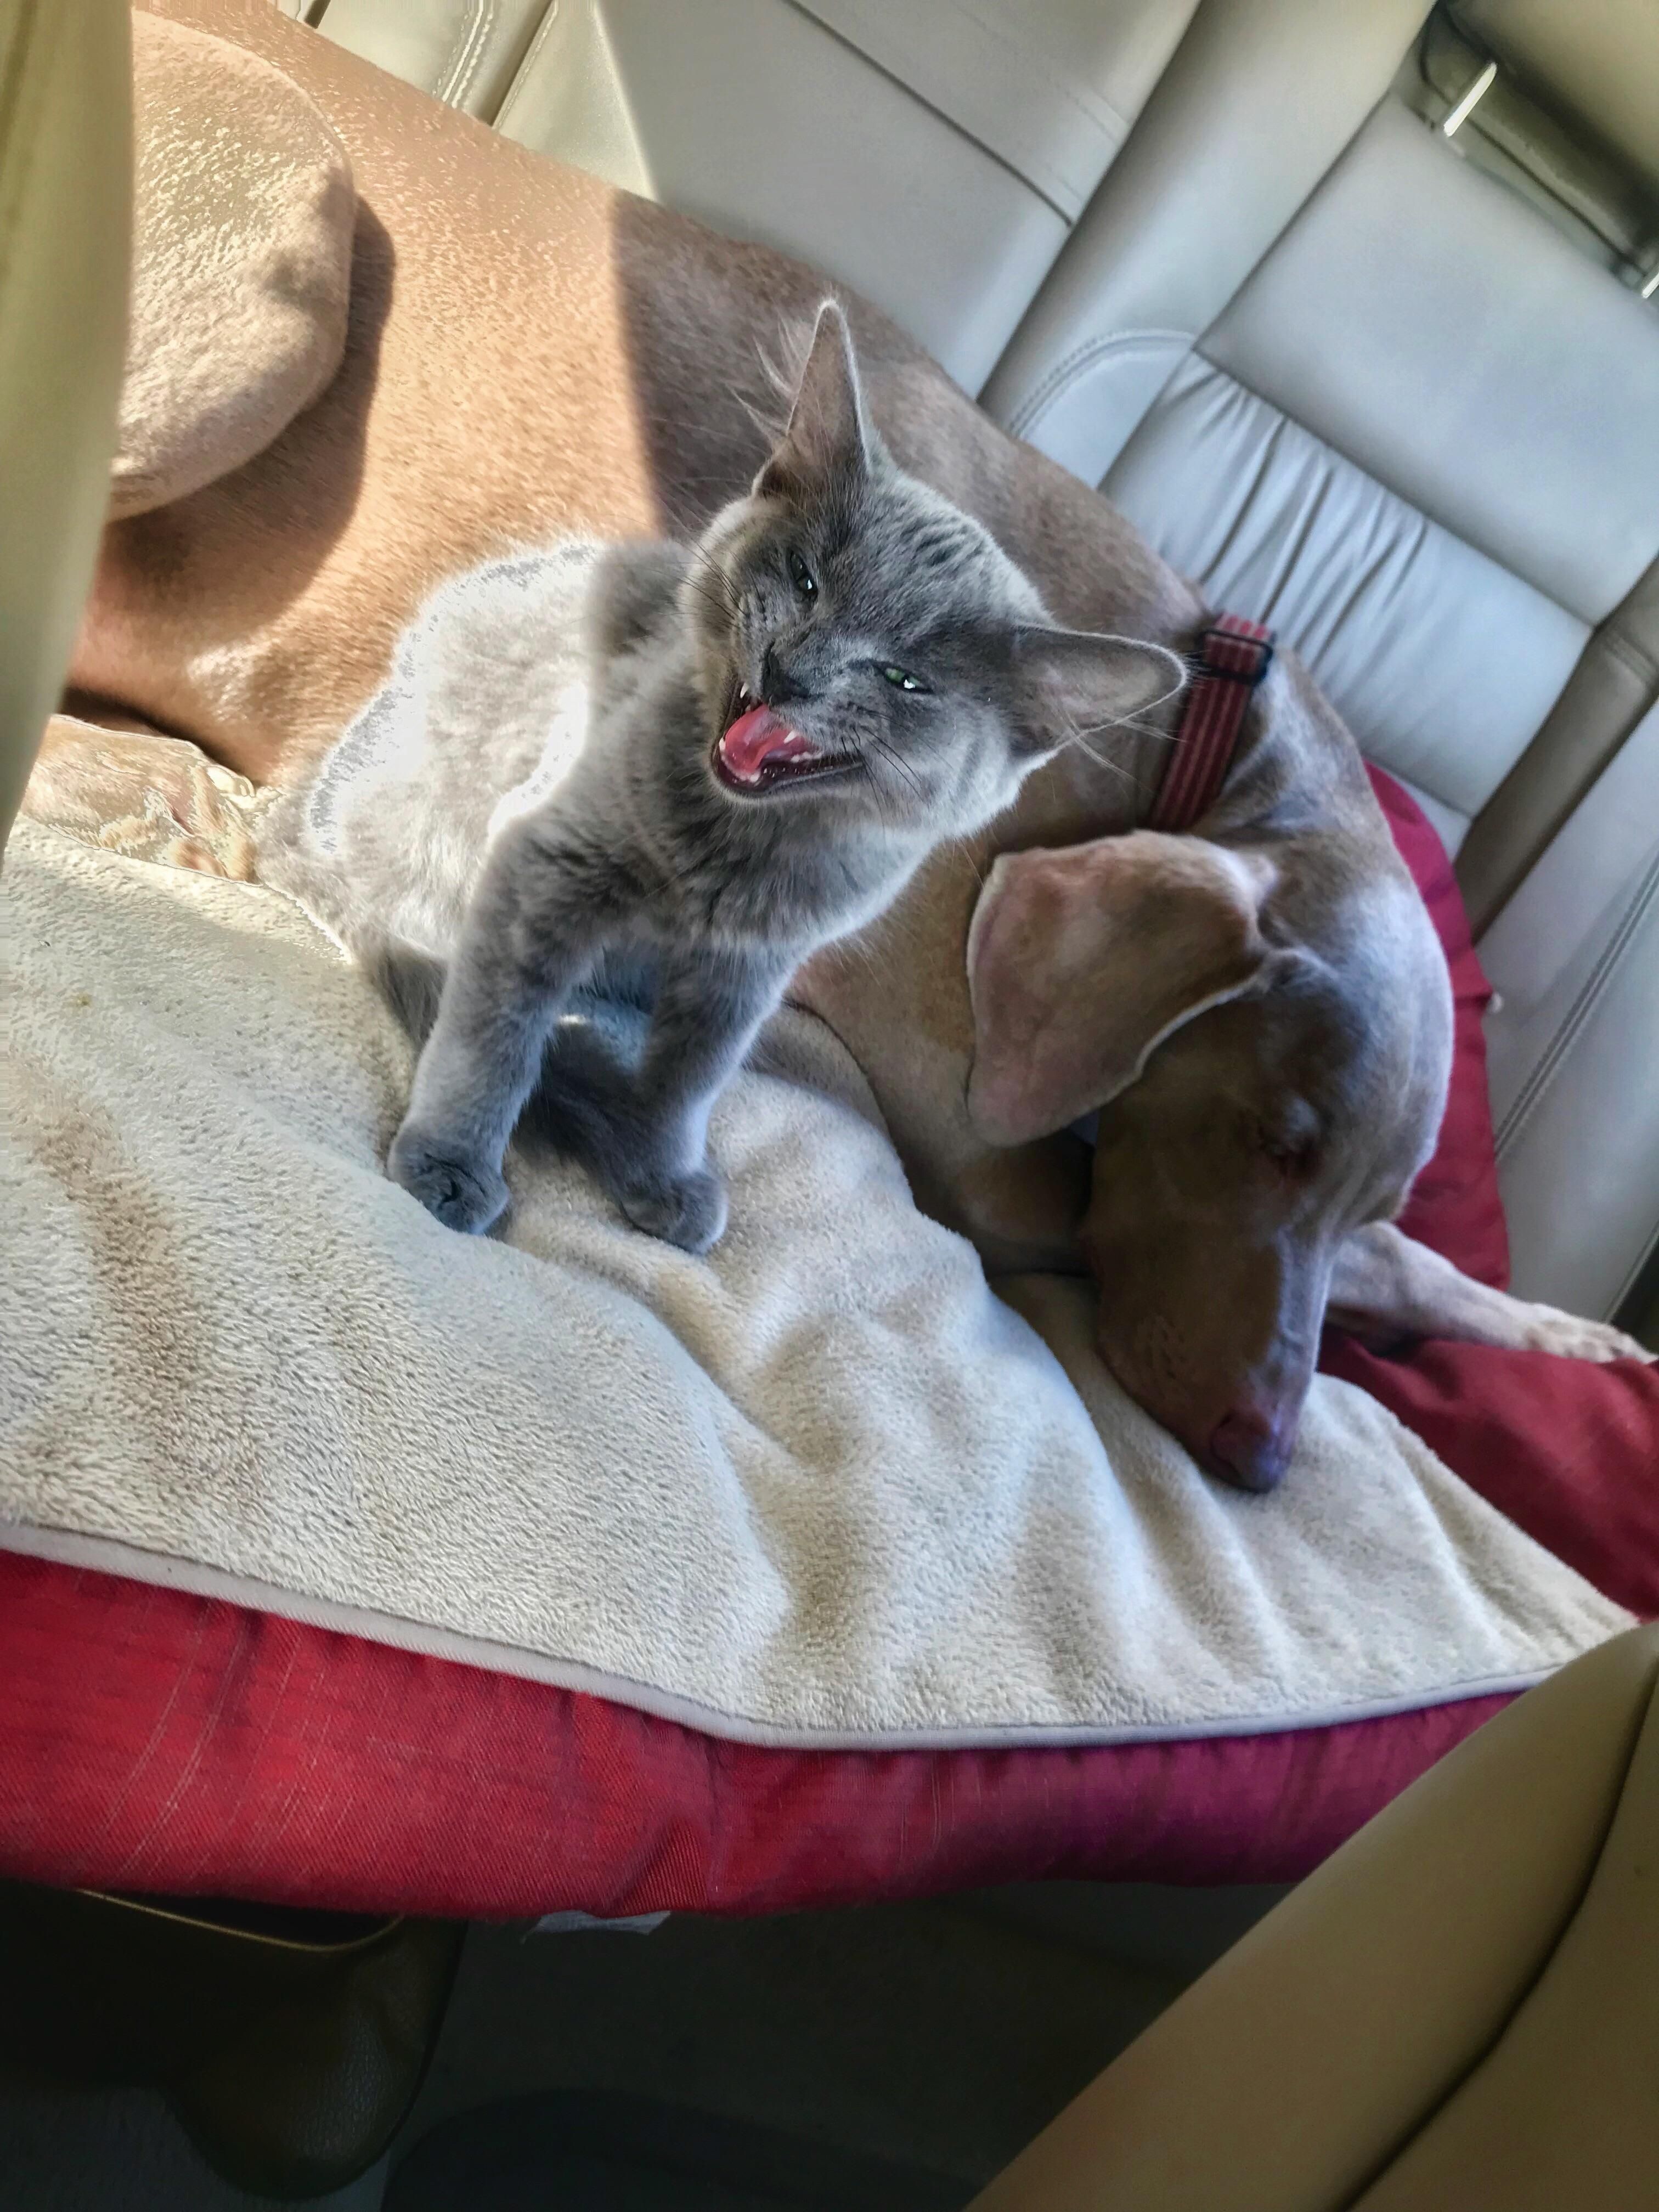 My new kitten enthusiastically singing the song of his people in the car.